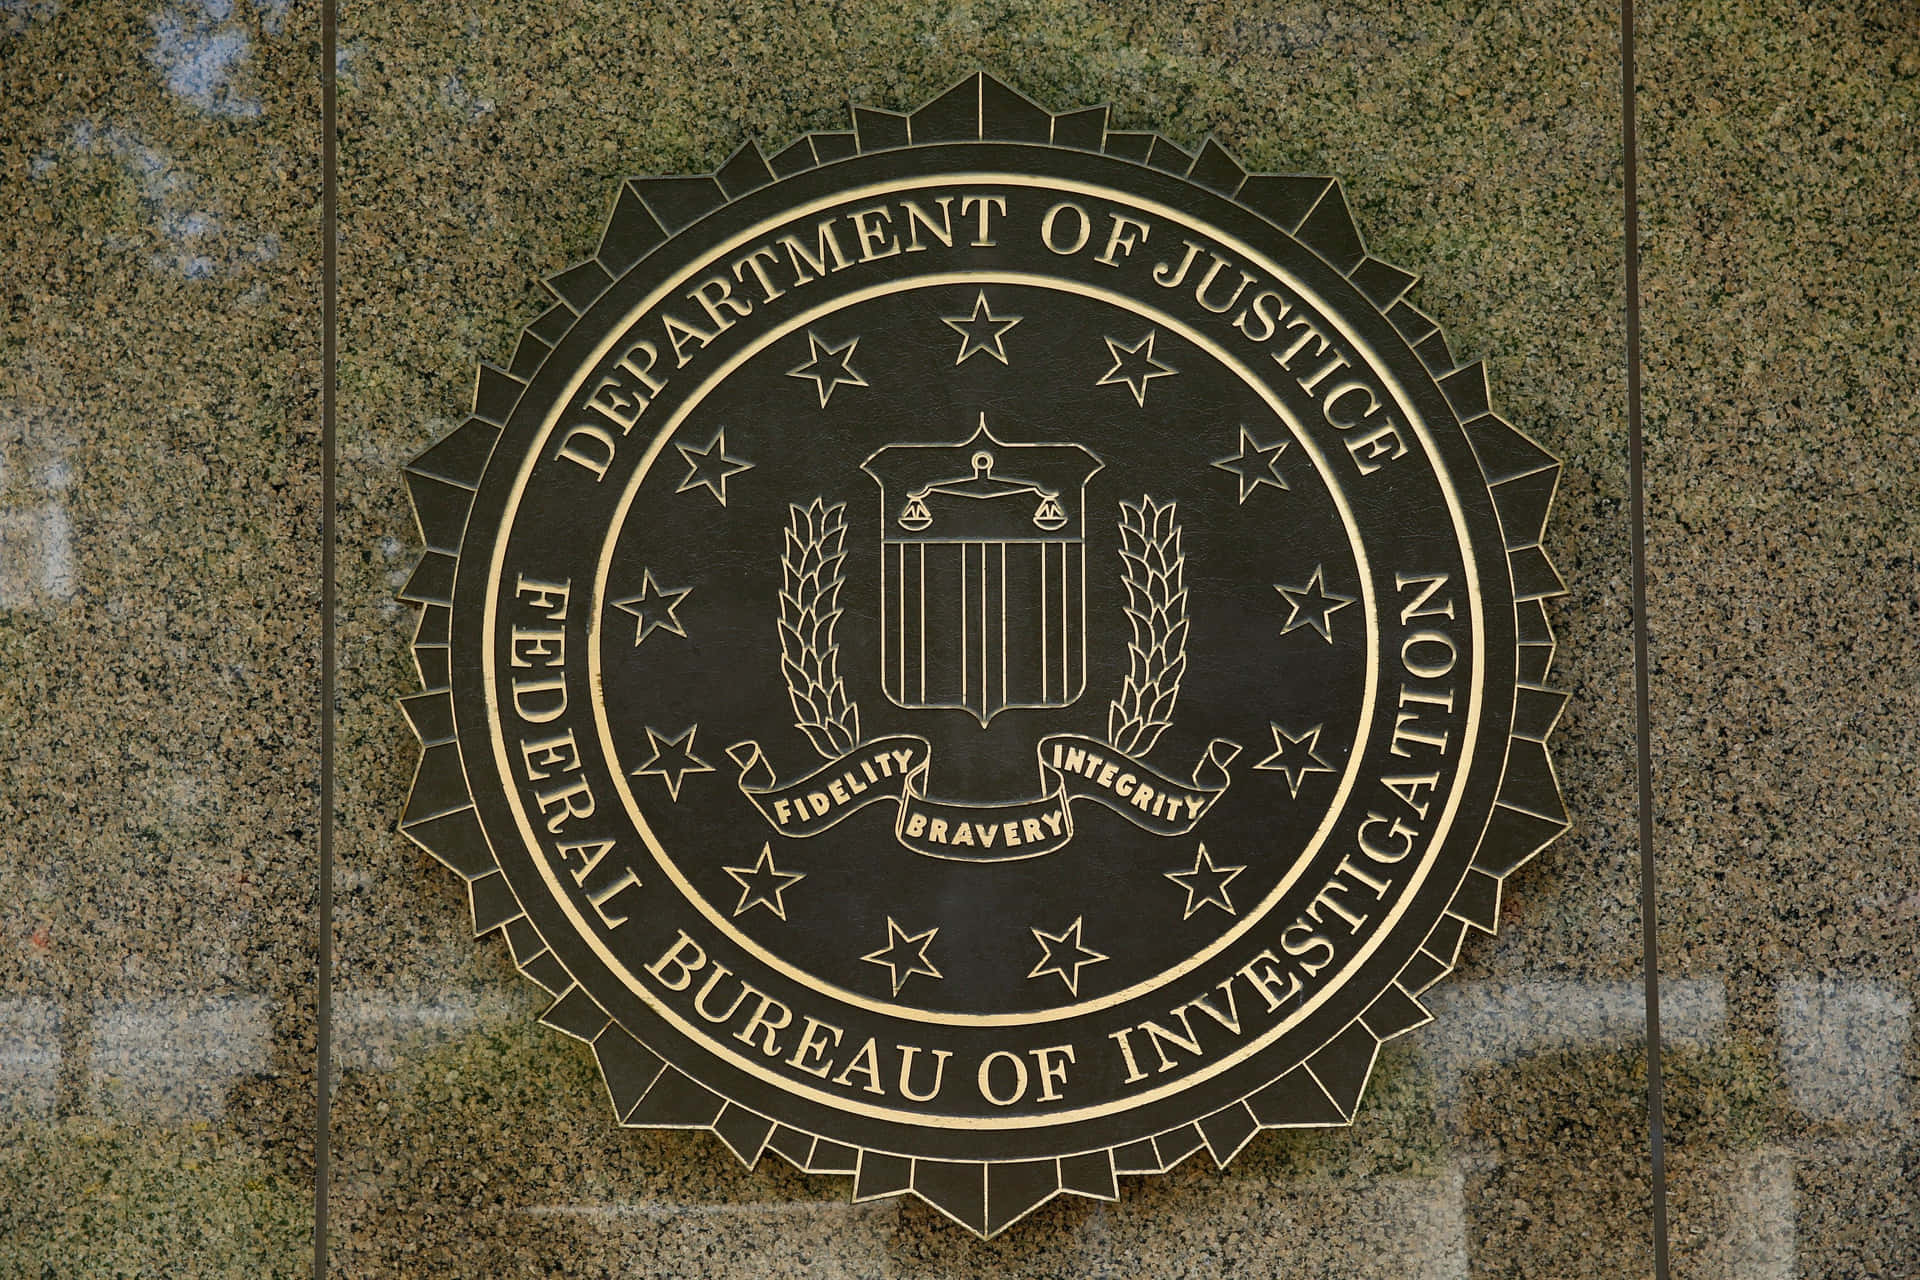 The Fbi Logo Is On The Wall Of A Building Background